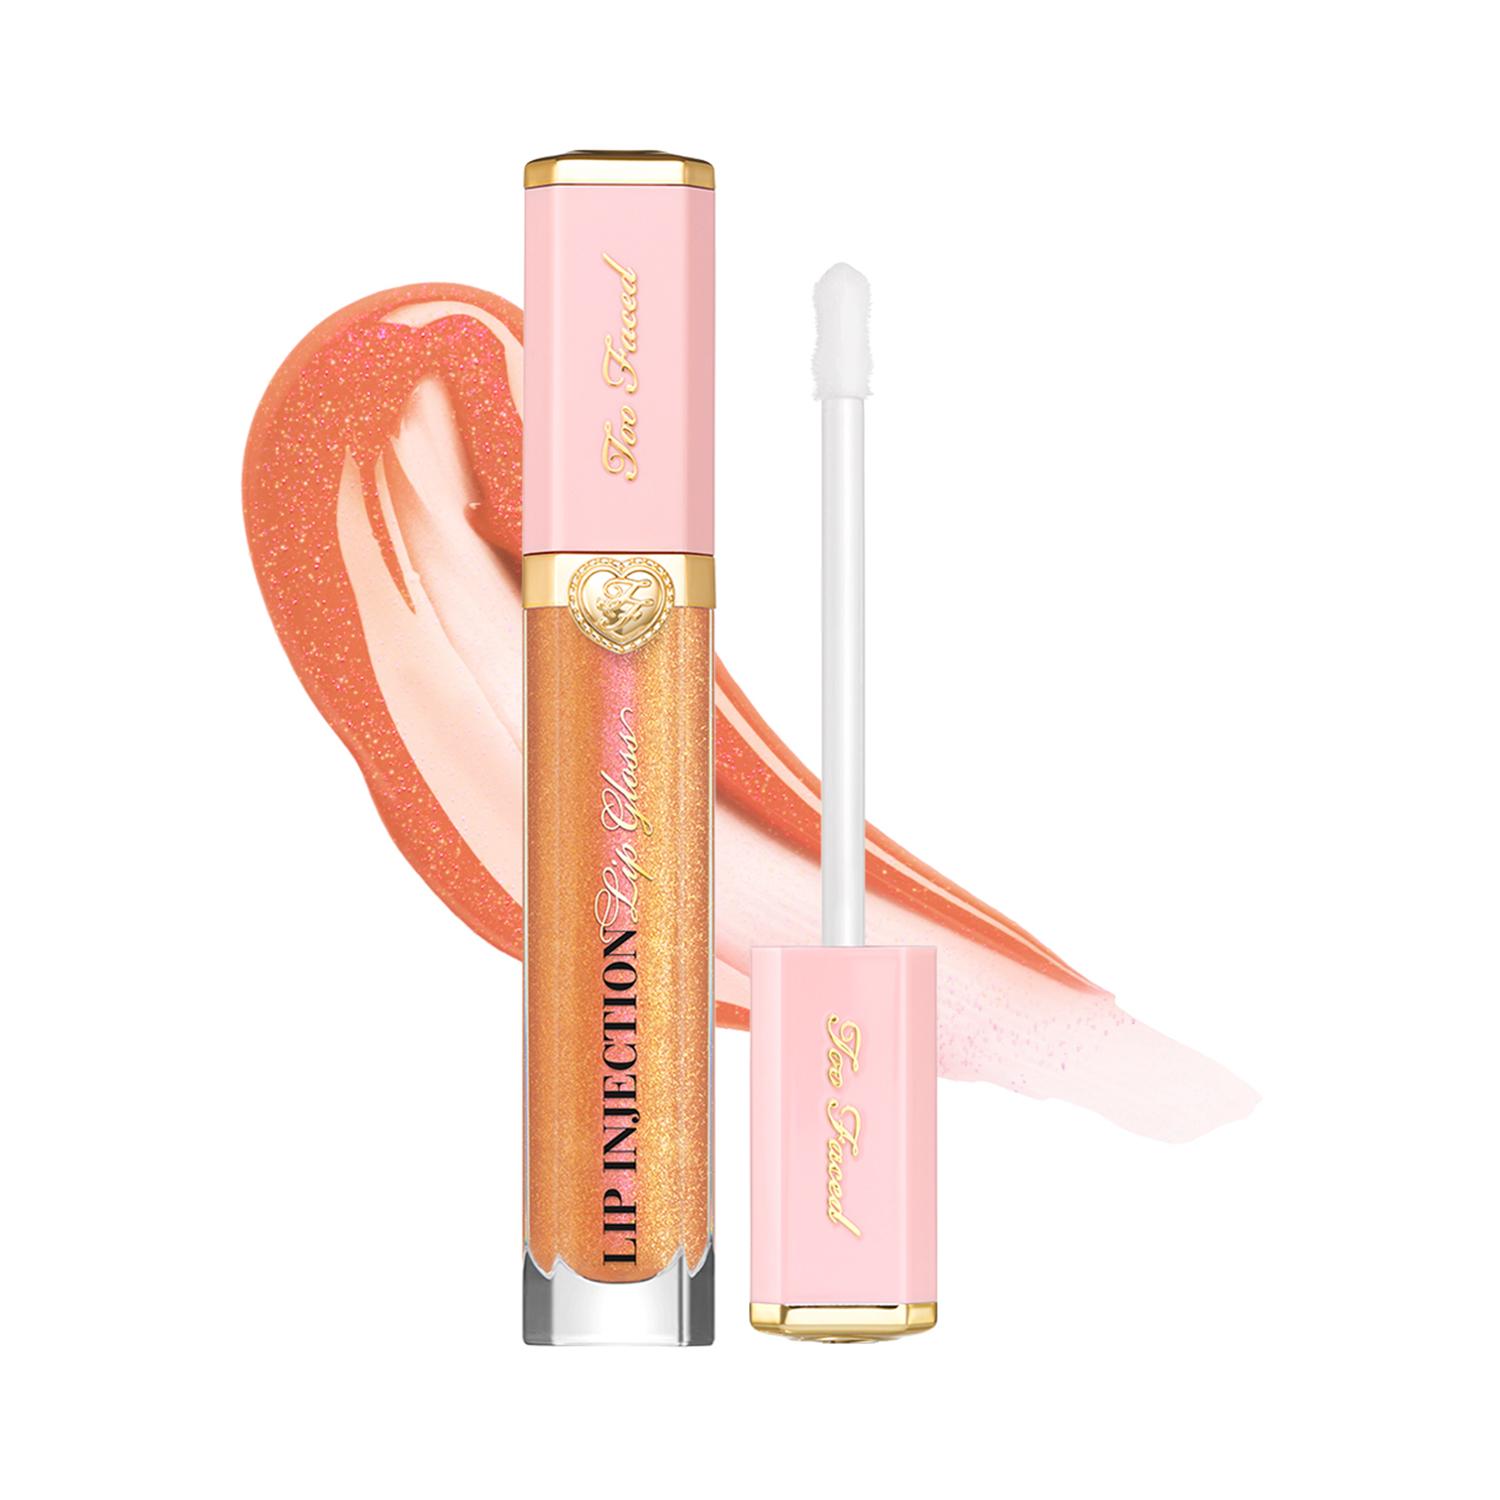 Too Faced | Too Faced Lip Injection Power Plumping Lip Gloss - Secret Sauce (7ml)